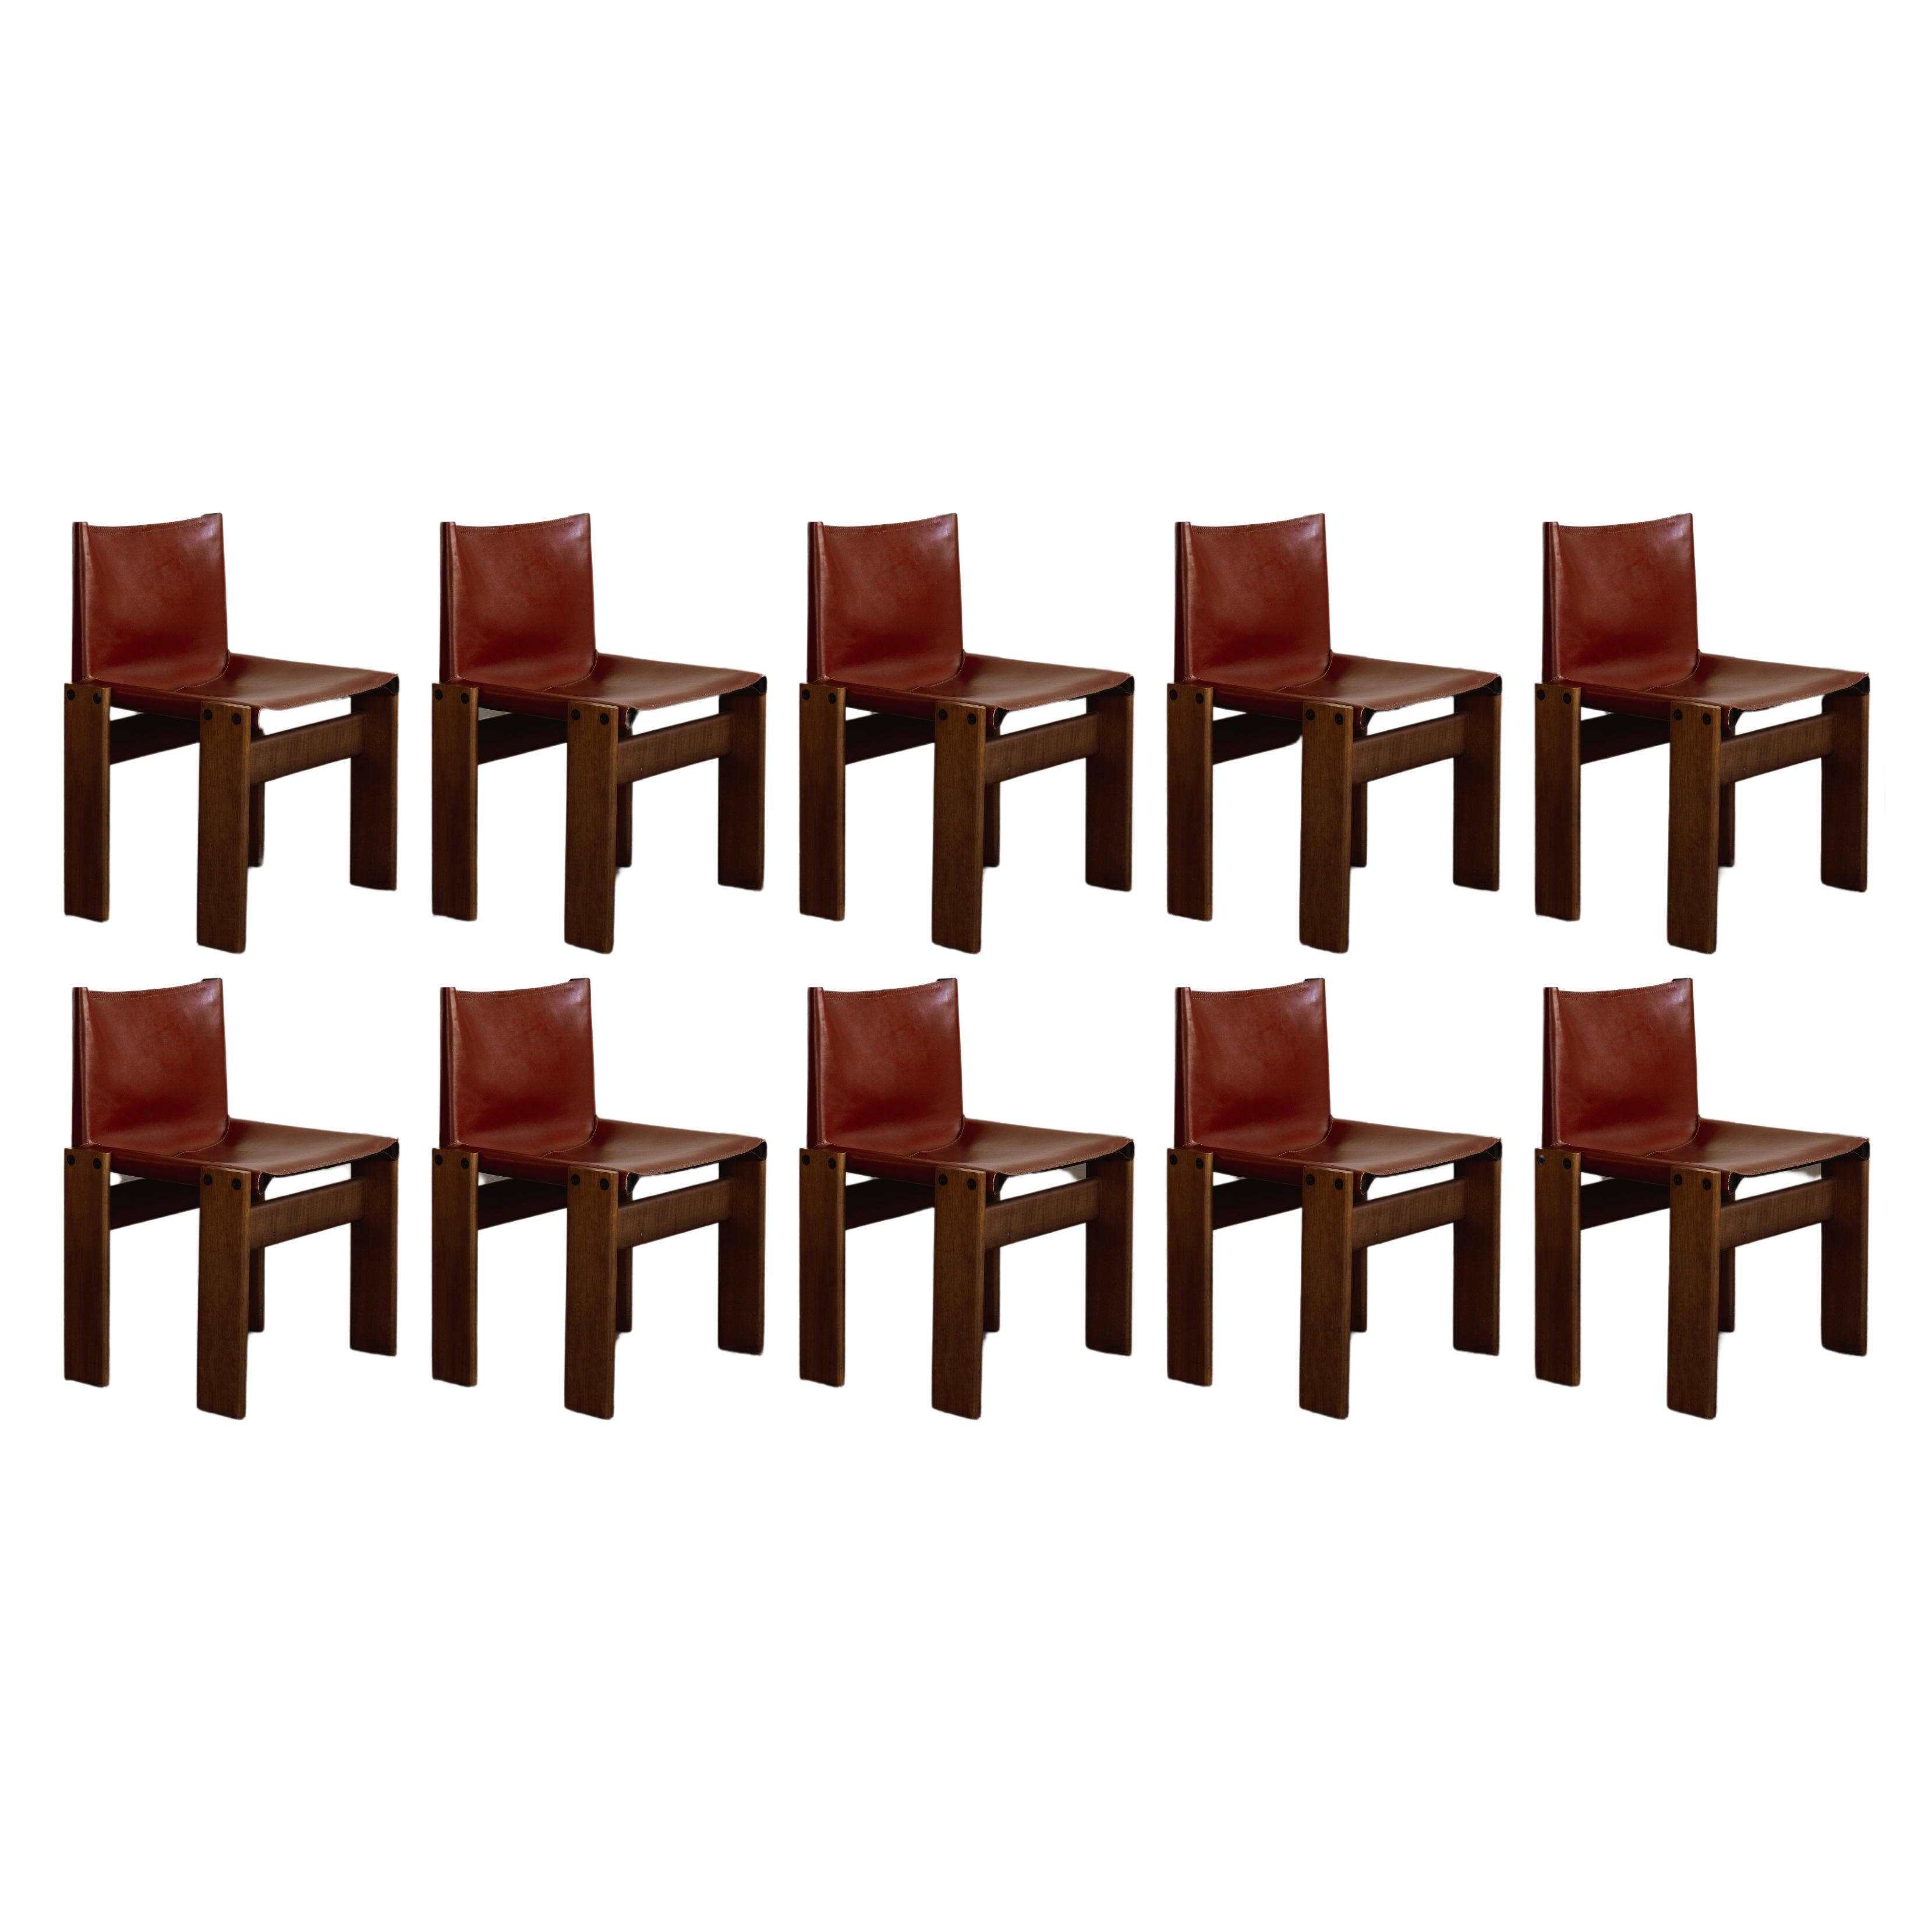 Afra & Tobia Scarpa "Monk" Dining Chairs for Molteni, 1974, Set of 10 For Sale